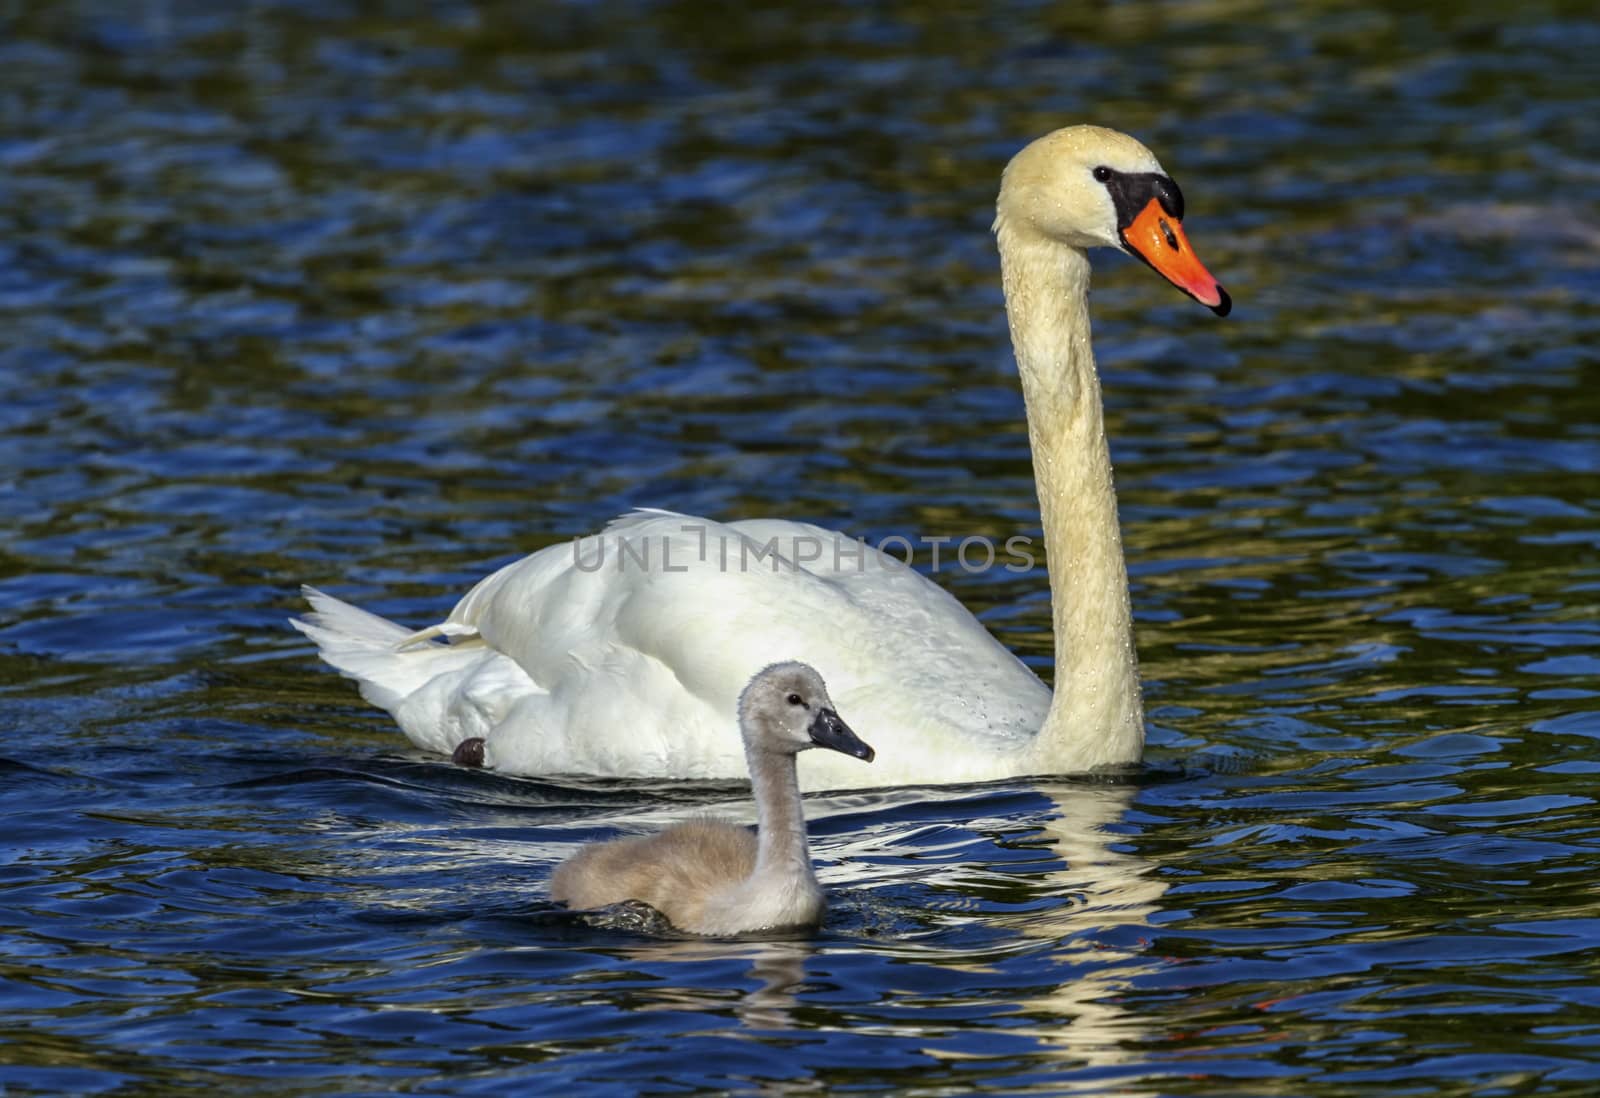 Mute swan, cygnus olor, mother and baby by Elenaphotos21